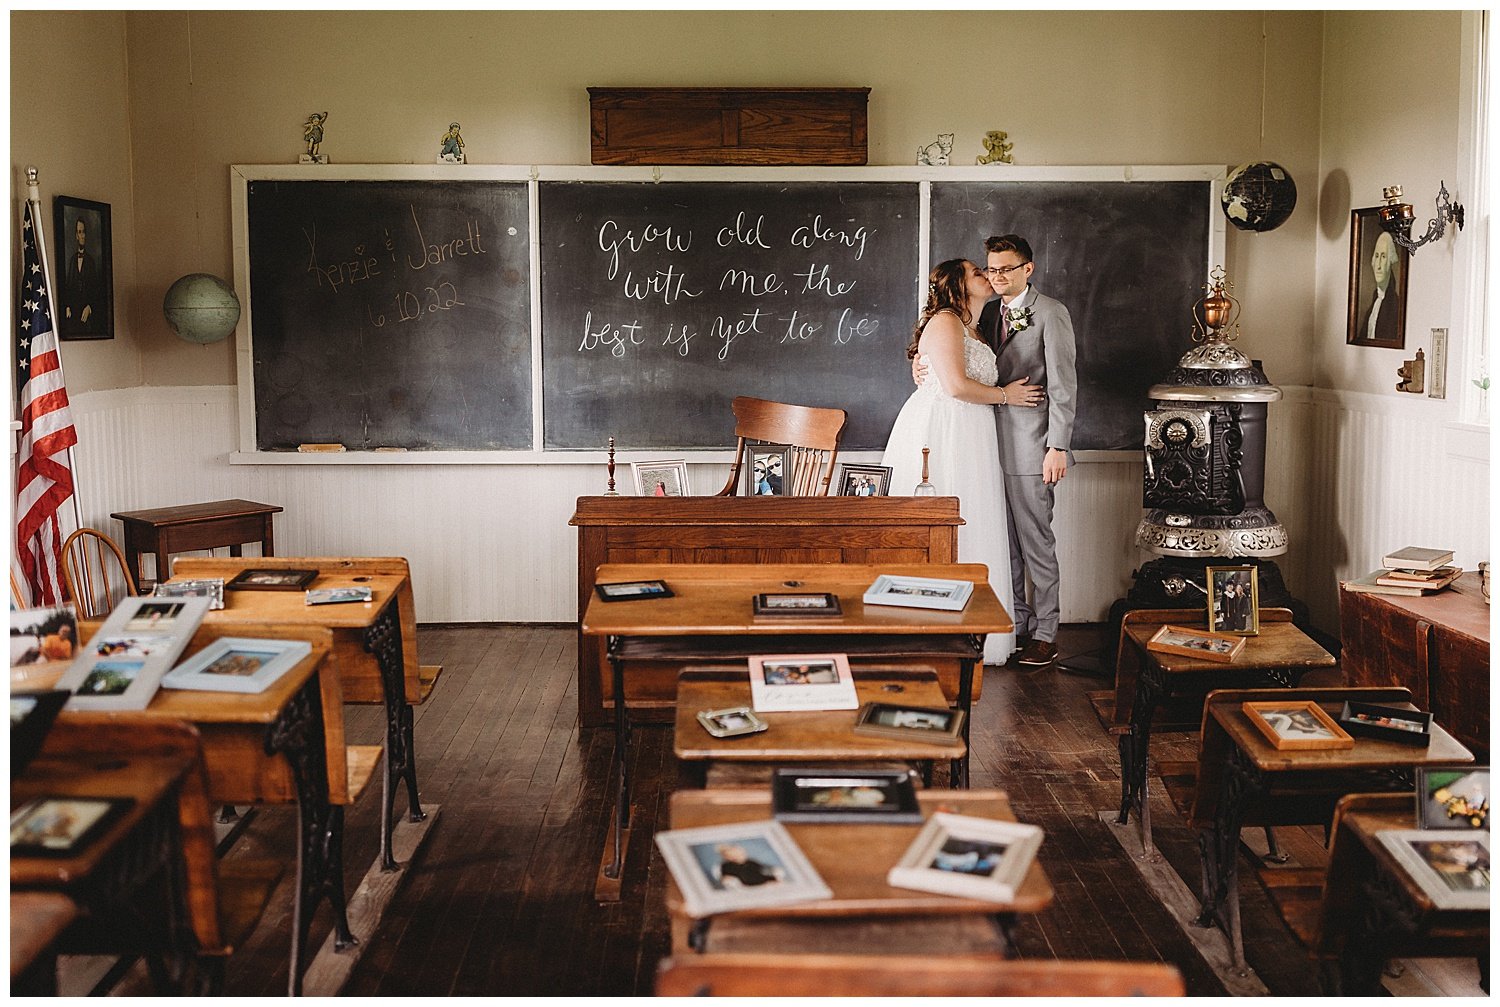  This is such a cute idea! The schoolhouse at Oak Hill Farm was filled with photos of Kenzie and Jarrett throughout their childhoods and dating years. What a perfect backdrop for their memories!  